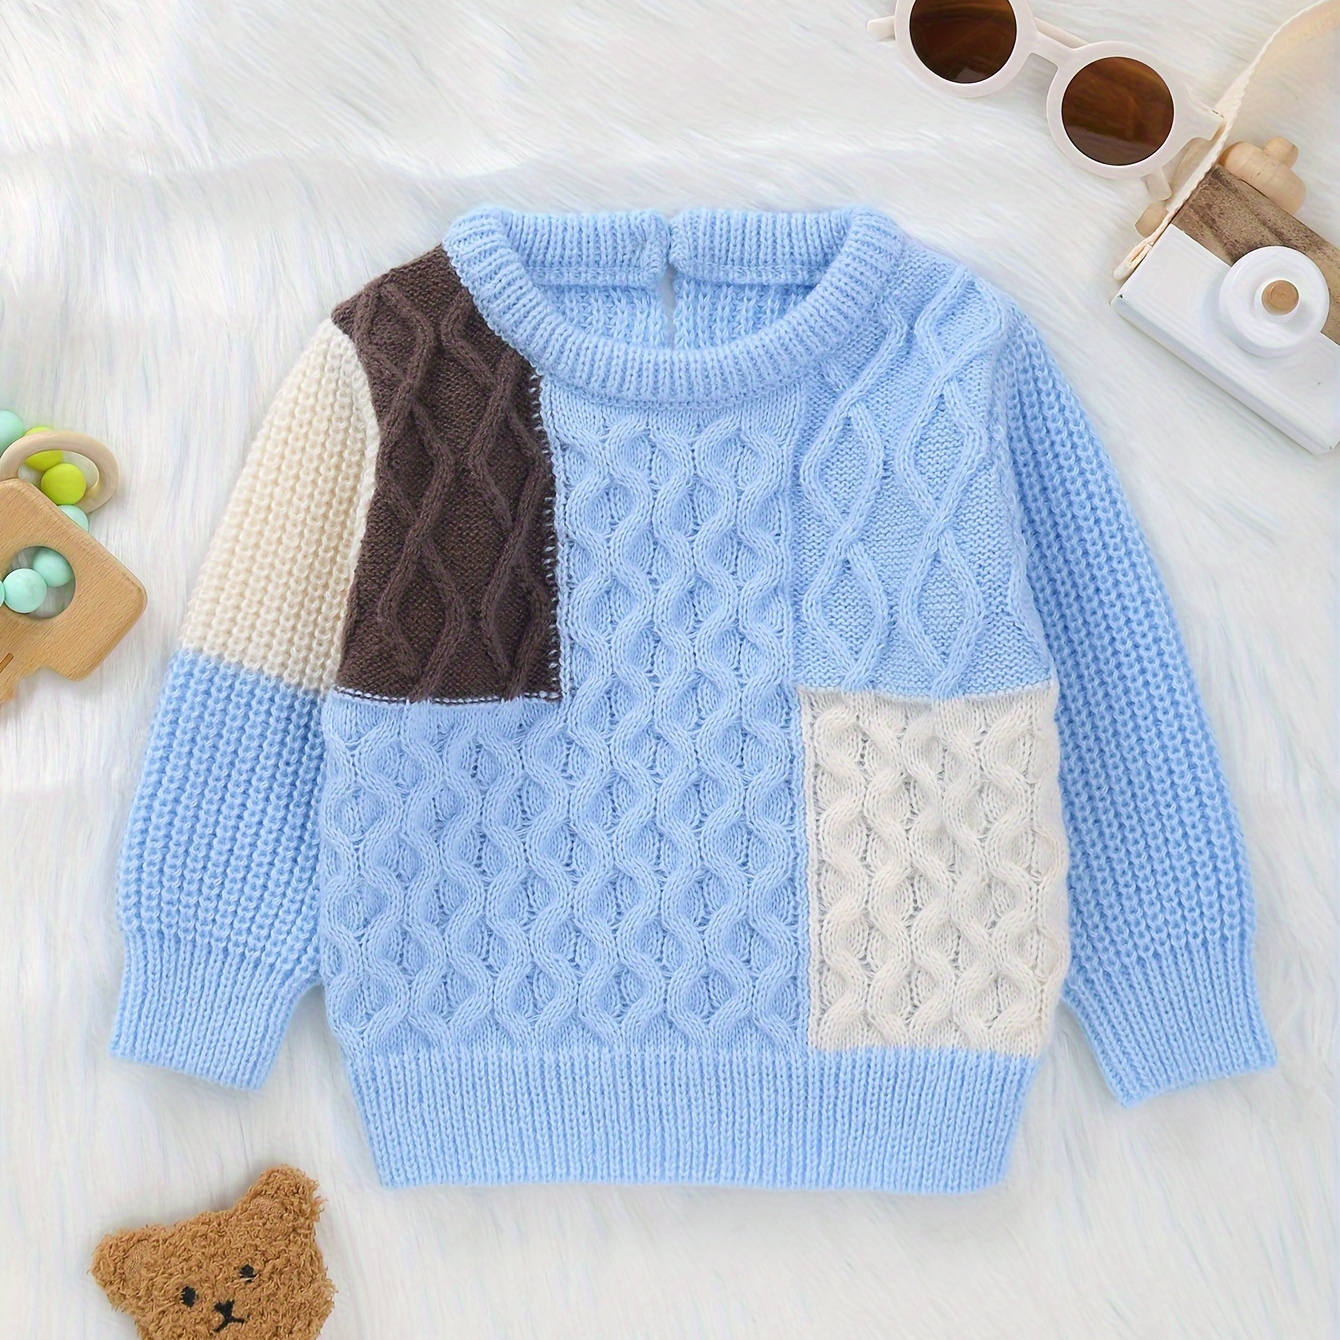 

Color Clash Jacquard Sweater For Toddlers, Comfy Cable Knit Long Sleeve Top, Baby Boy's Clothing, As Gift